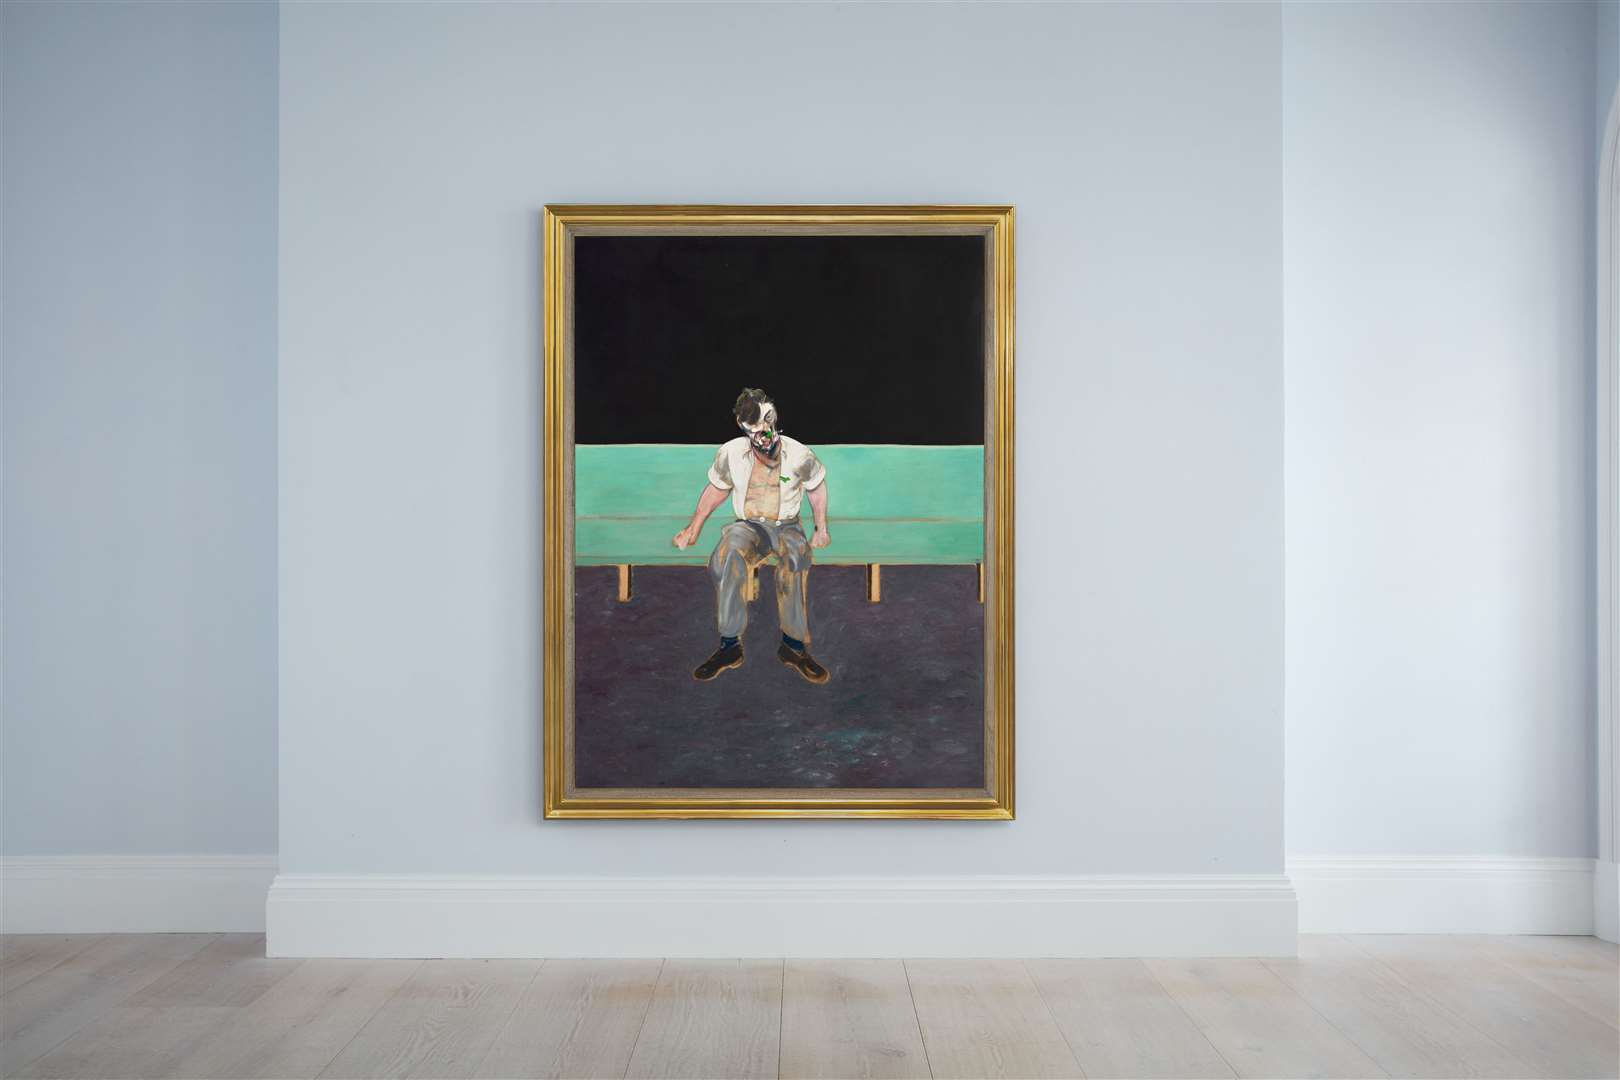 The portrait will go to auction for the first time on June 29 (The Estate of Francis Bacon/DACSArtimage/PA)